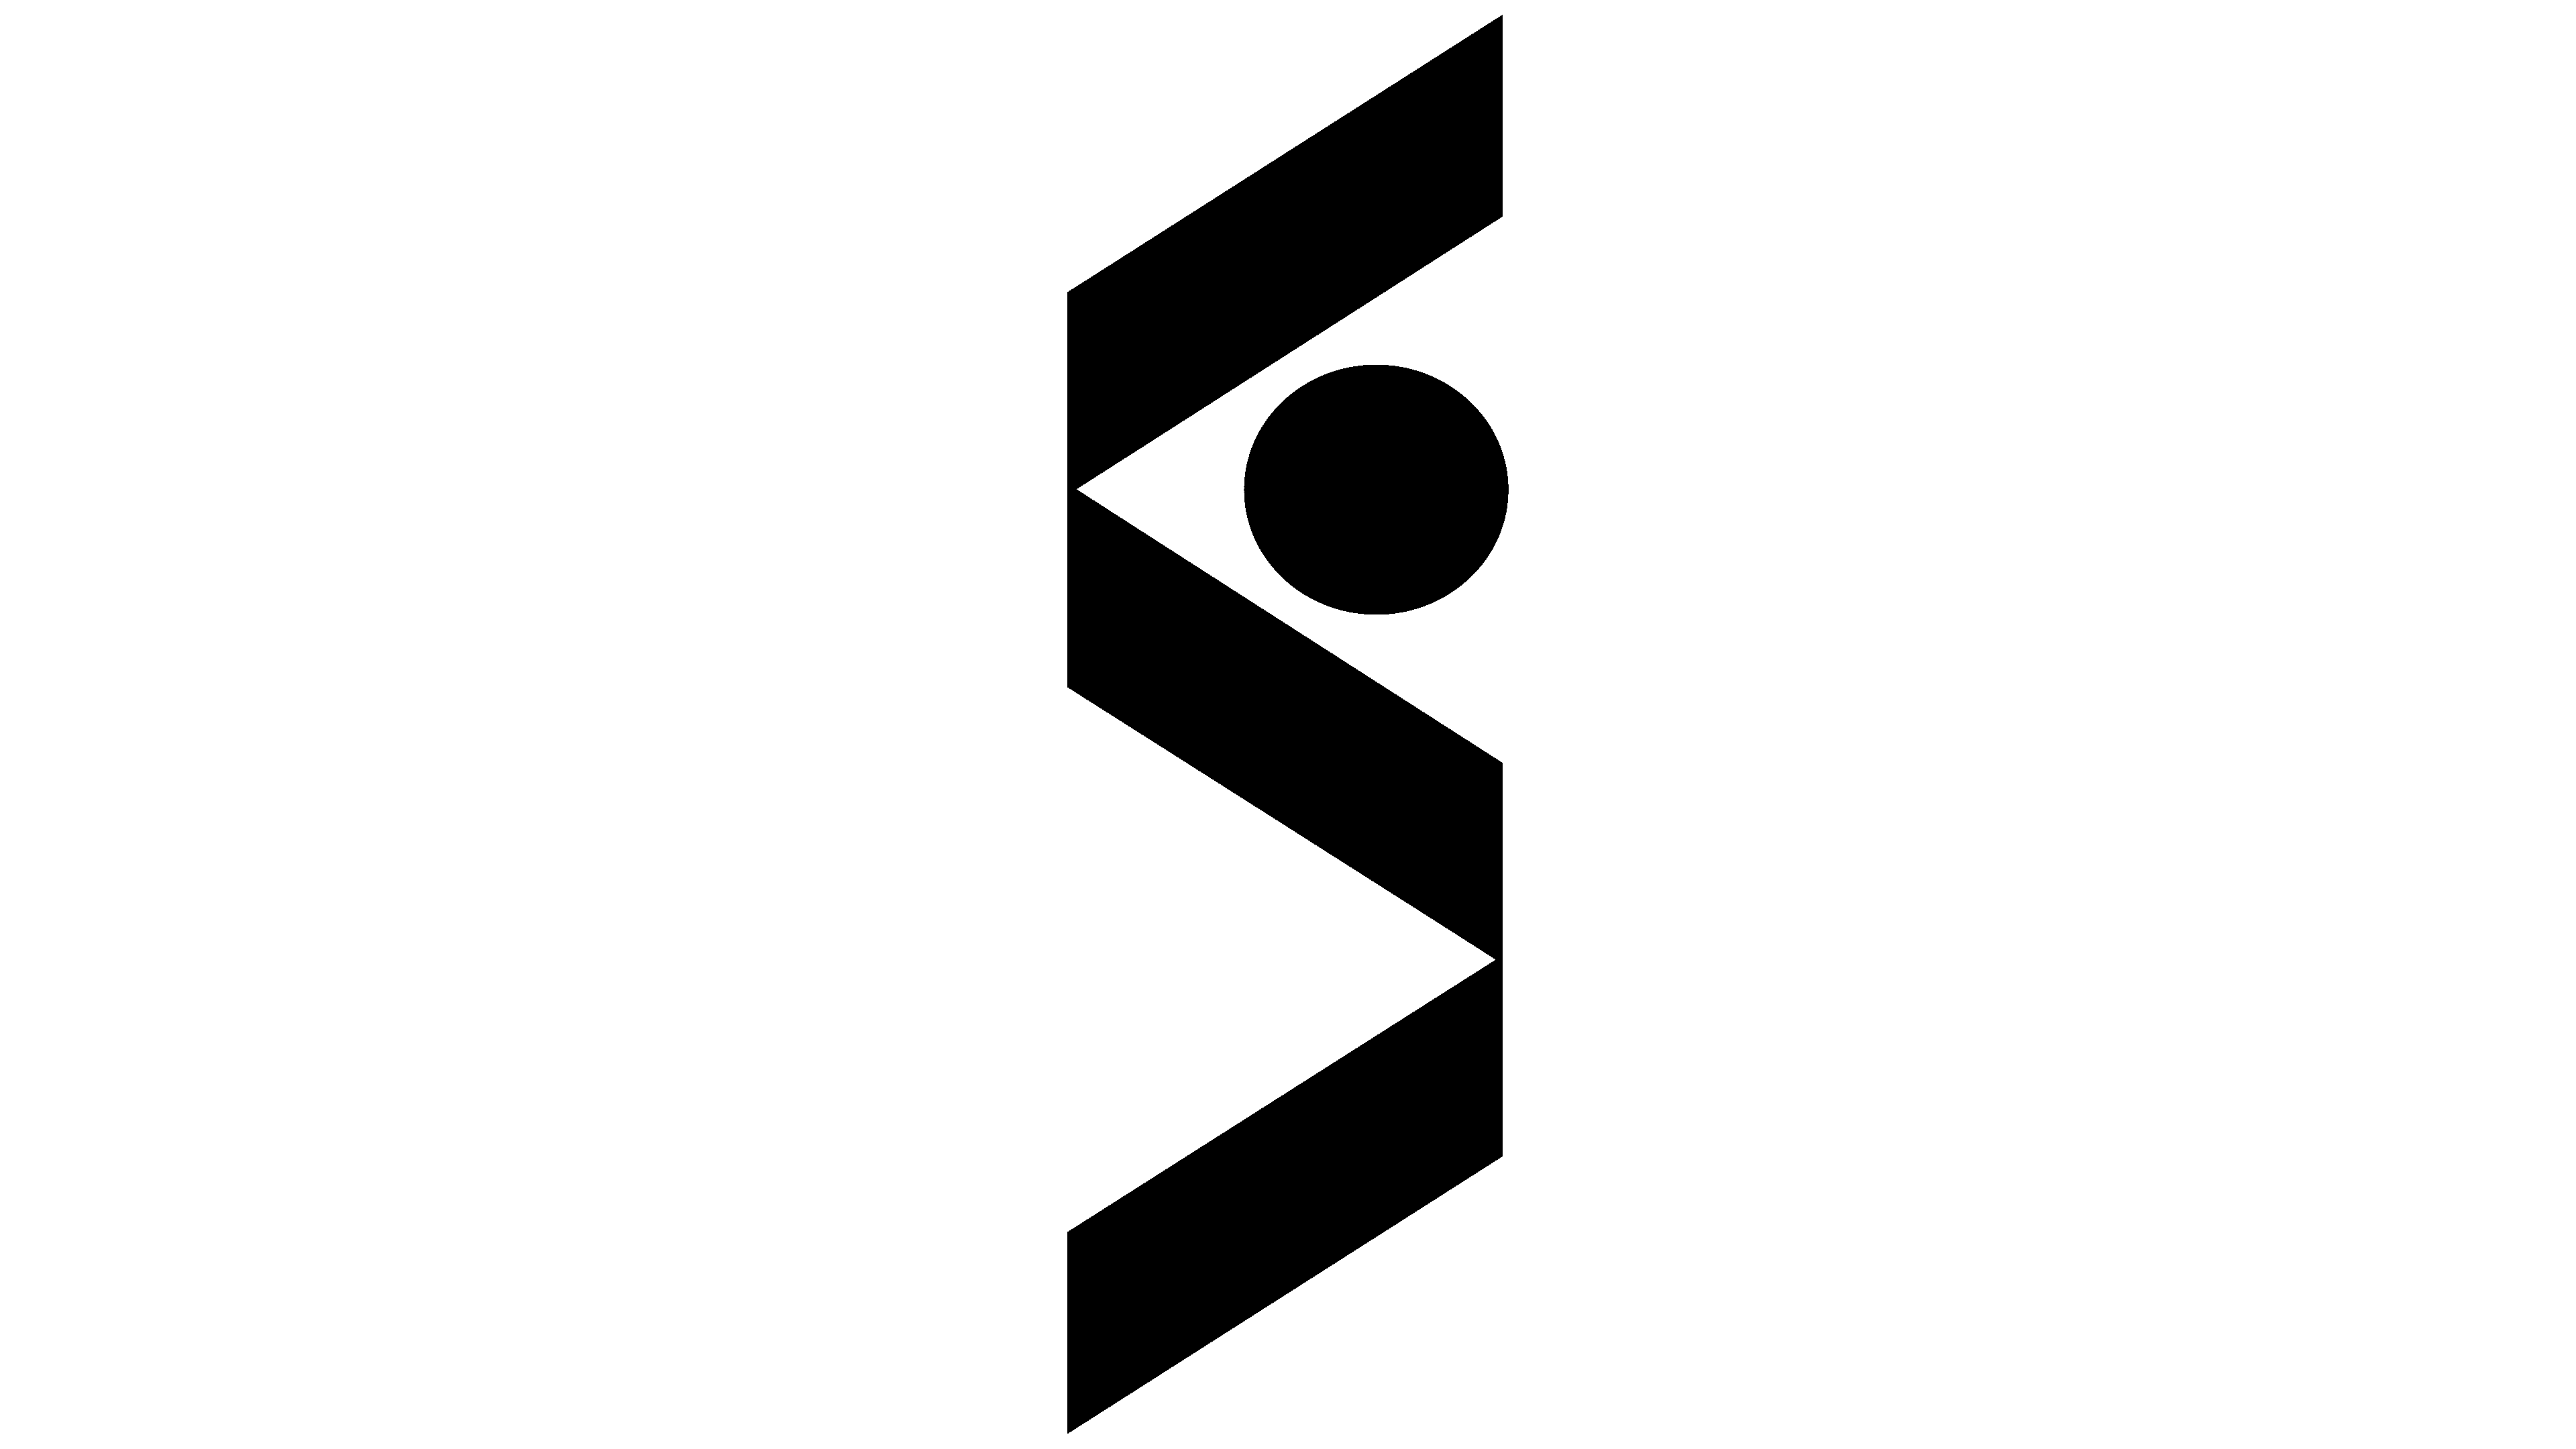 Stockmann Logo, symbol, meaning, history, PNG, brand